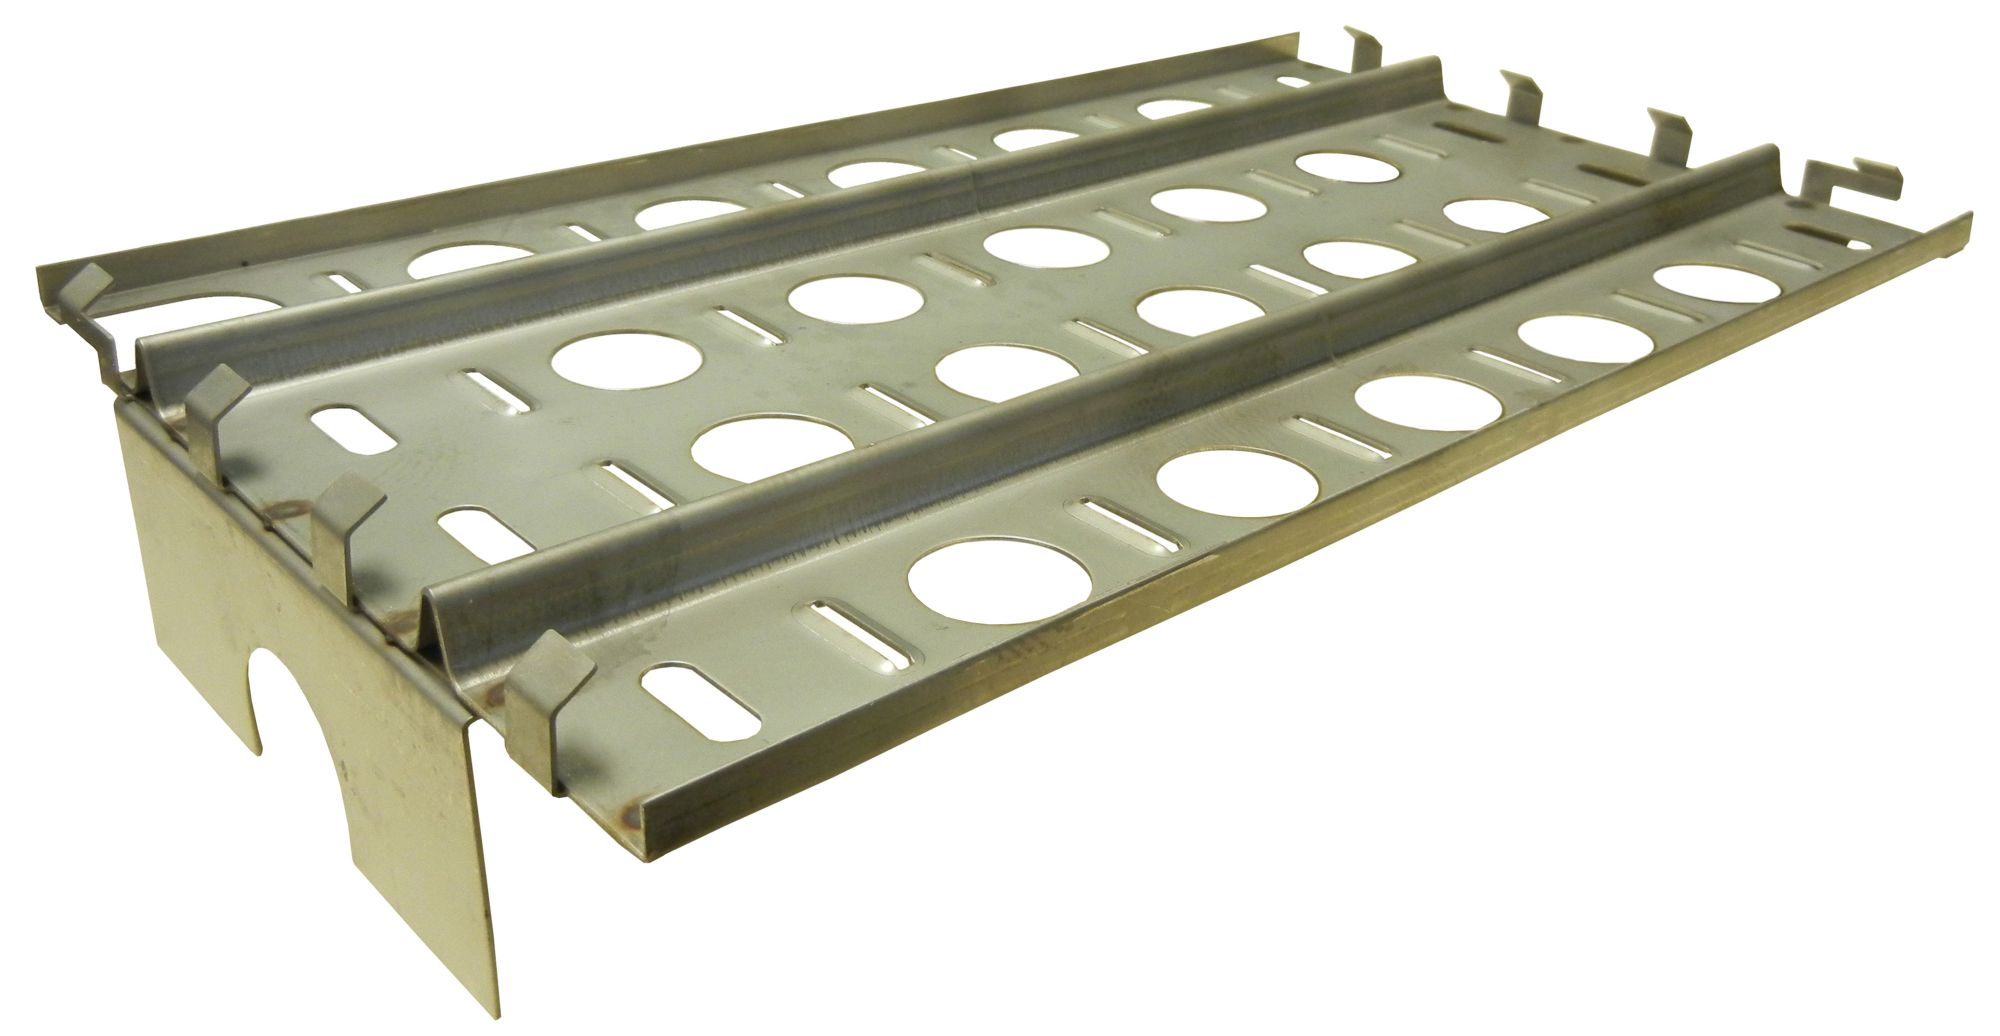 Stainless steel heat plate for Lynx brand gas grills